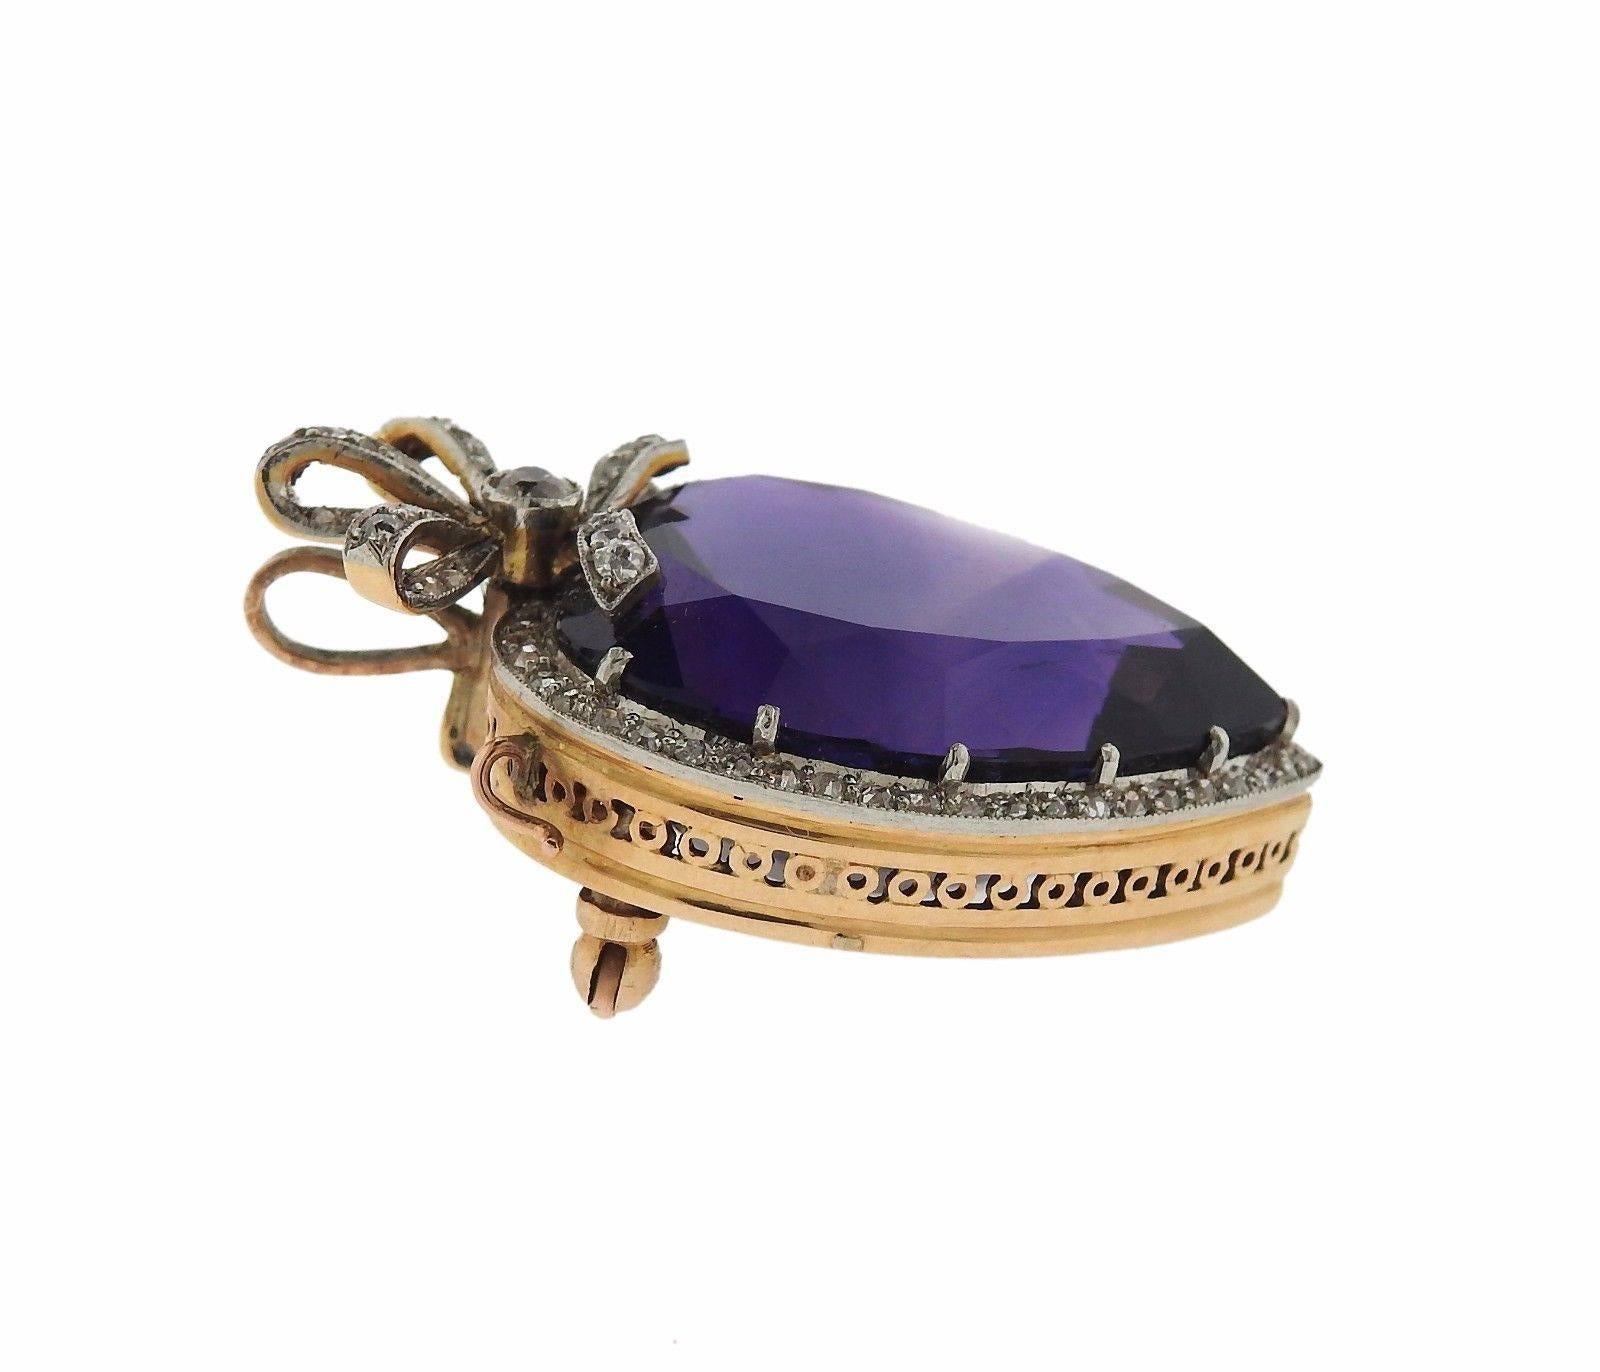 A 15k gold brooch pendant set with and amethyst and approximately 0.70ctw of H/VS-SI diamonds. The pendant measures 40mm x 26mm and weighs 17.7 grams.  Tested 15k. Retailed by S.J. Phillips London 